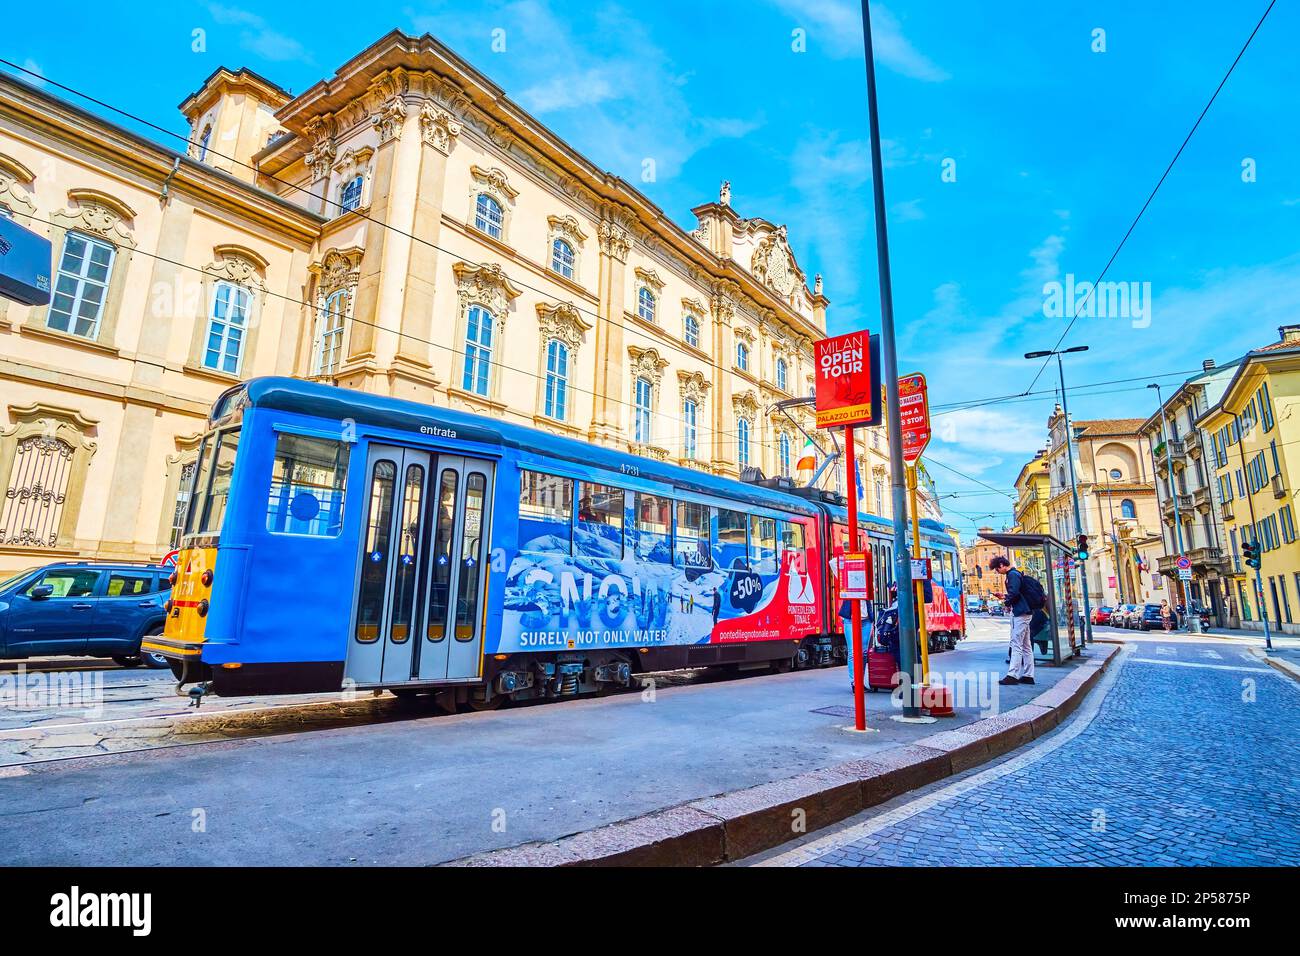 MILAN, ITALY - APRIL 11, 2022: Colorful tram on the tram stop on Corso Magenta street, on April 11 in Milan, Italy Stock Photo